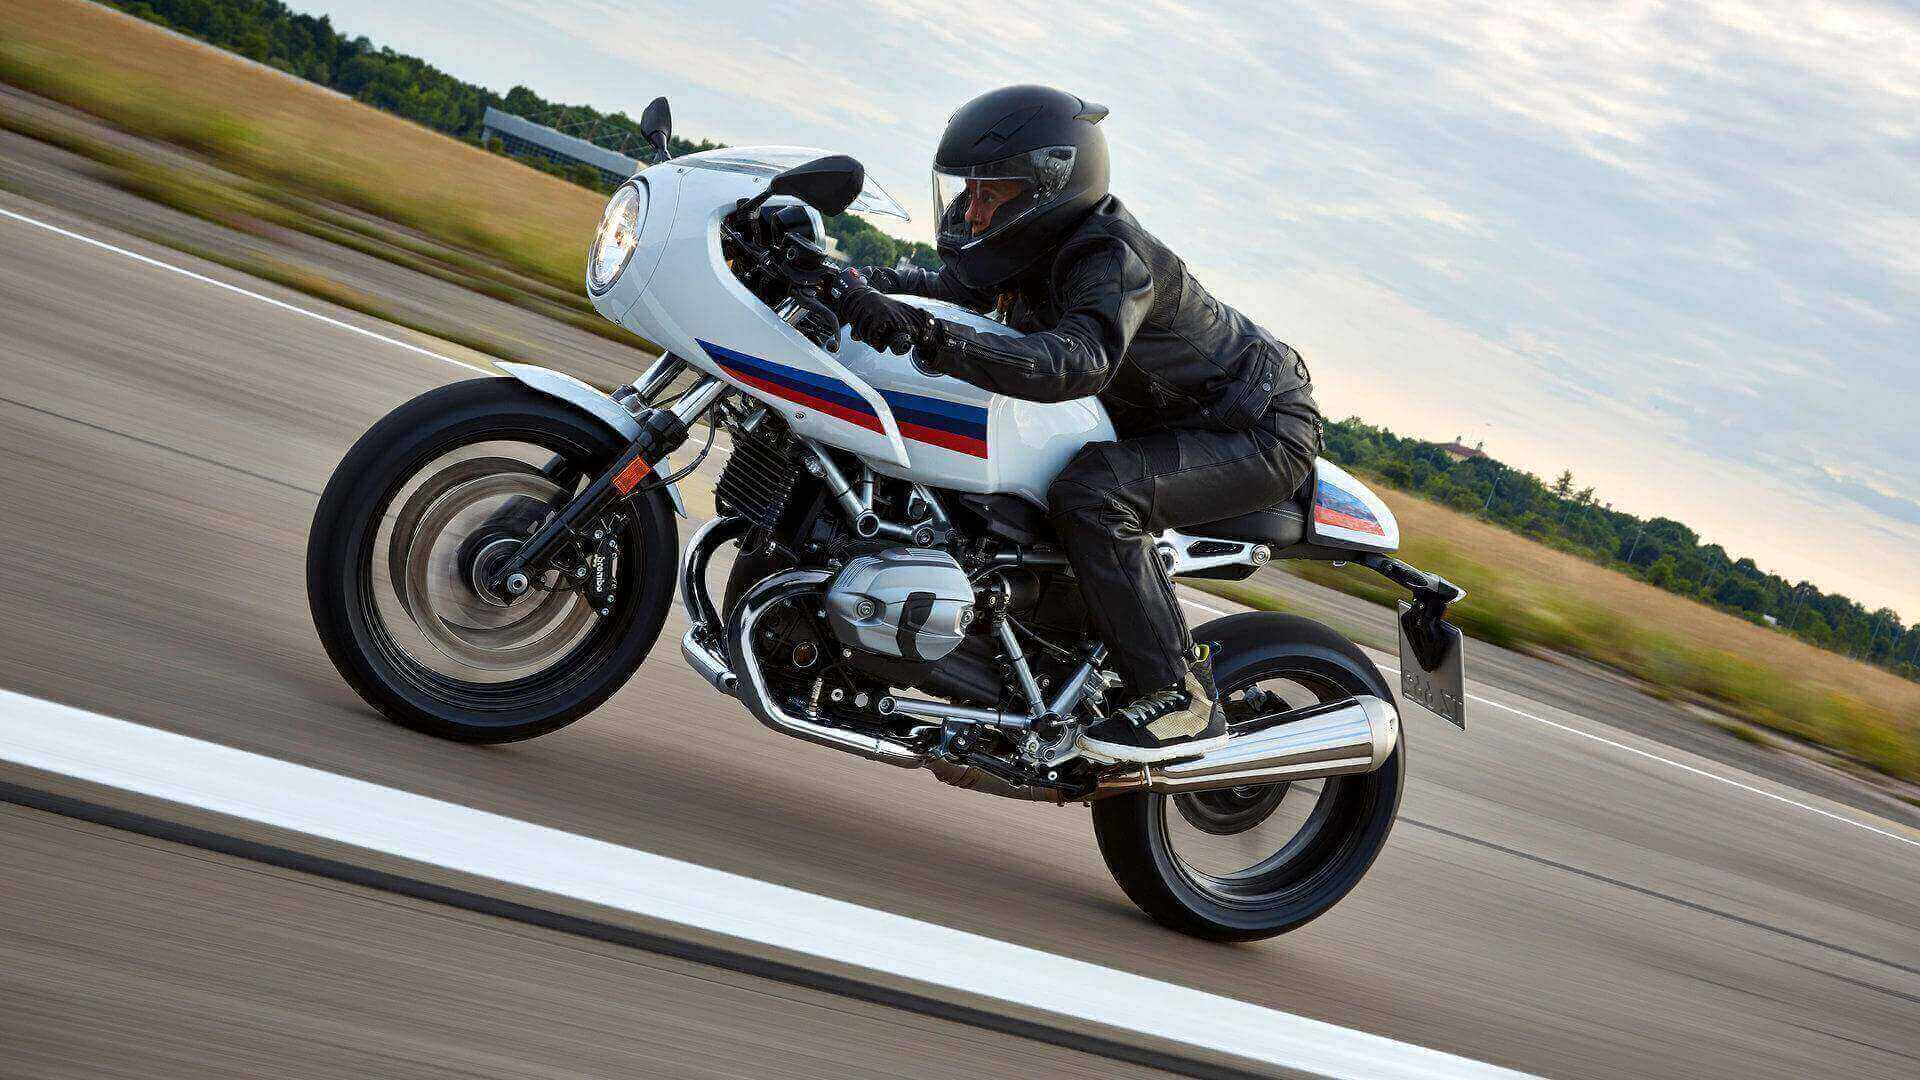 The 5 best cafe racer motorcycles (2022)